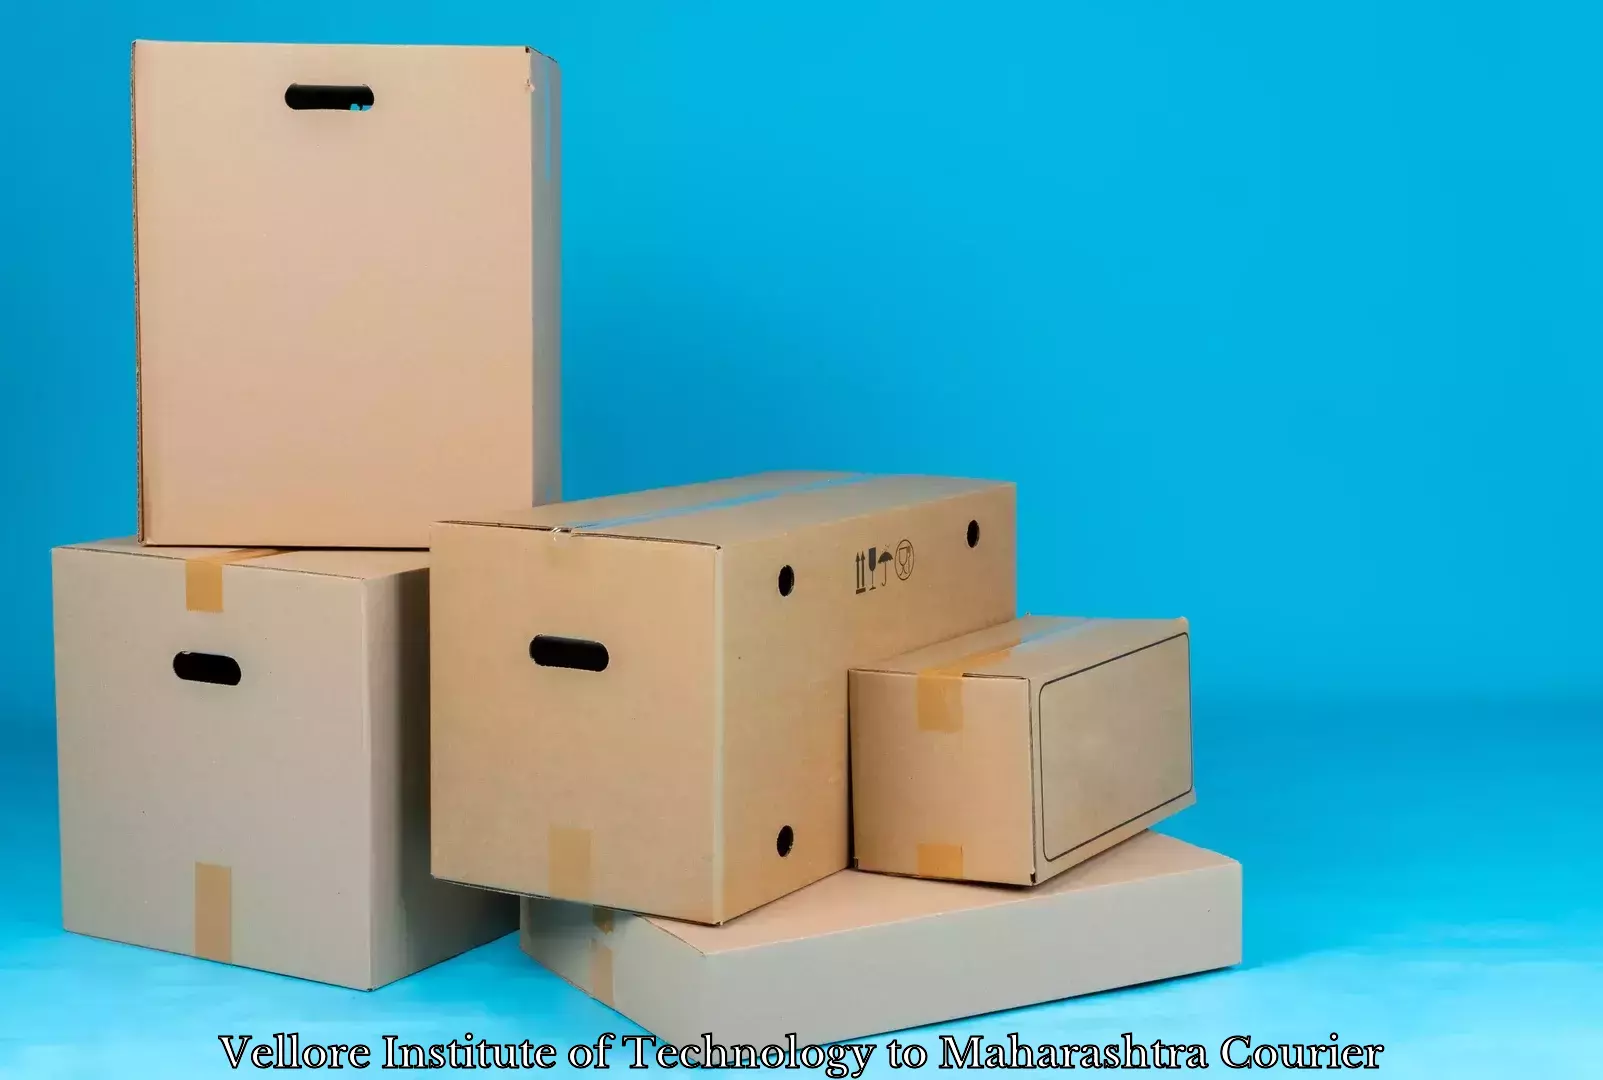 Budget-friendly movers Vellore Institute of Technology to Kalyan